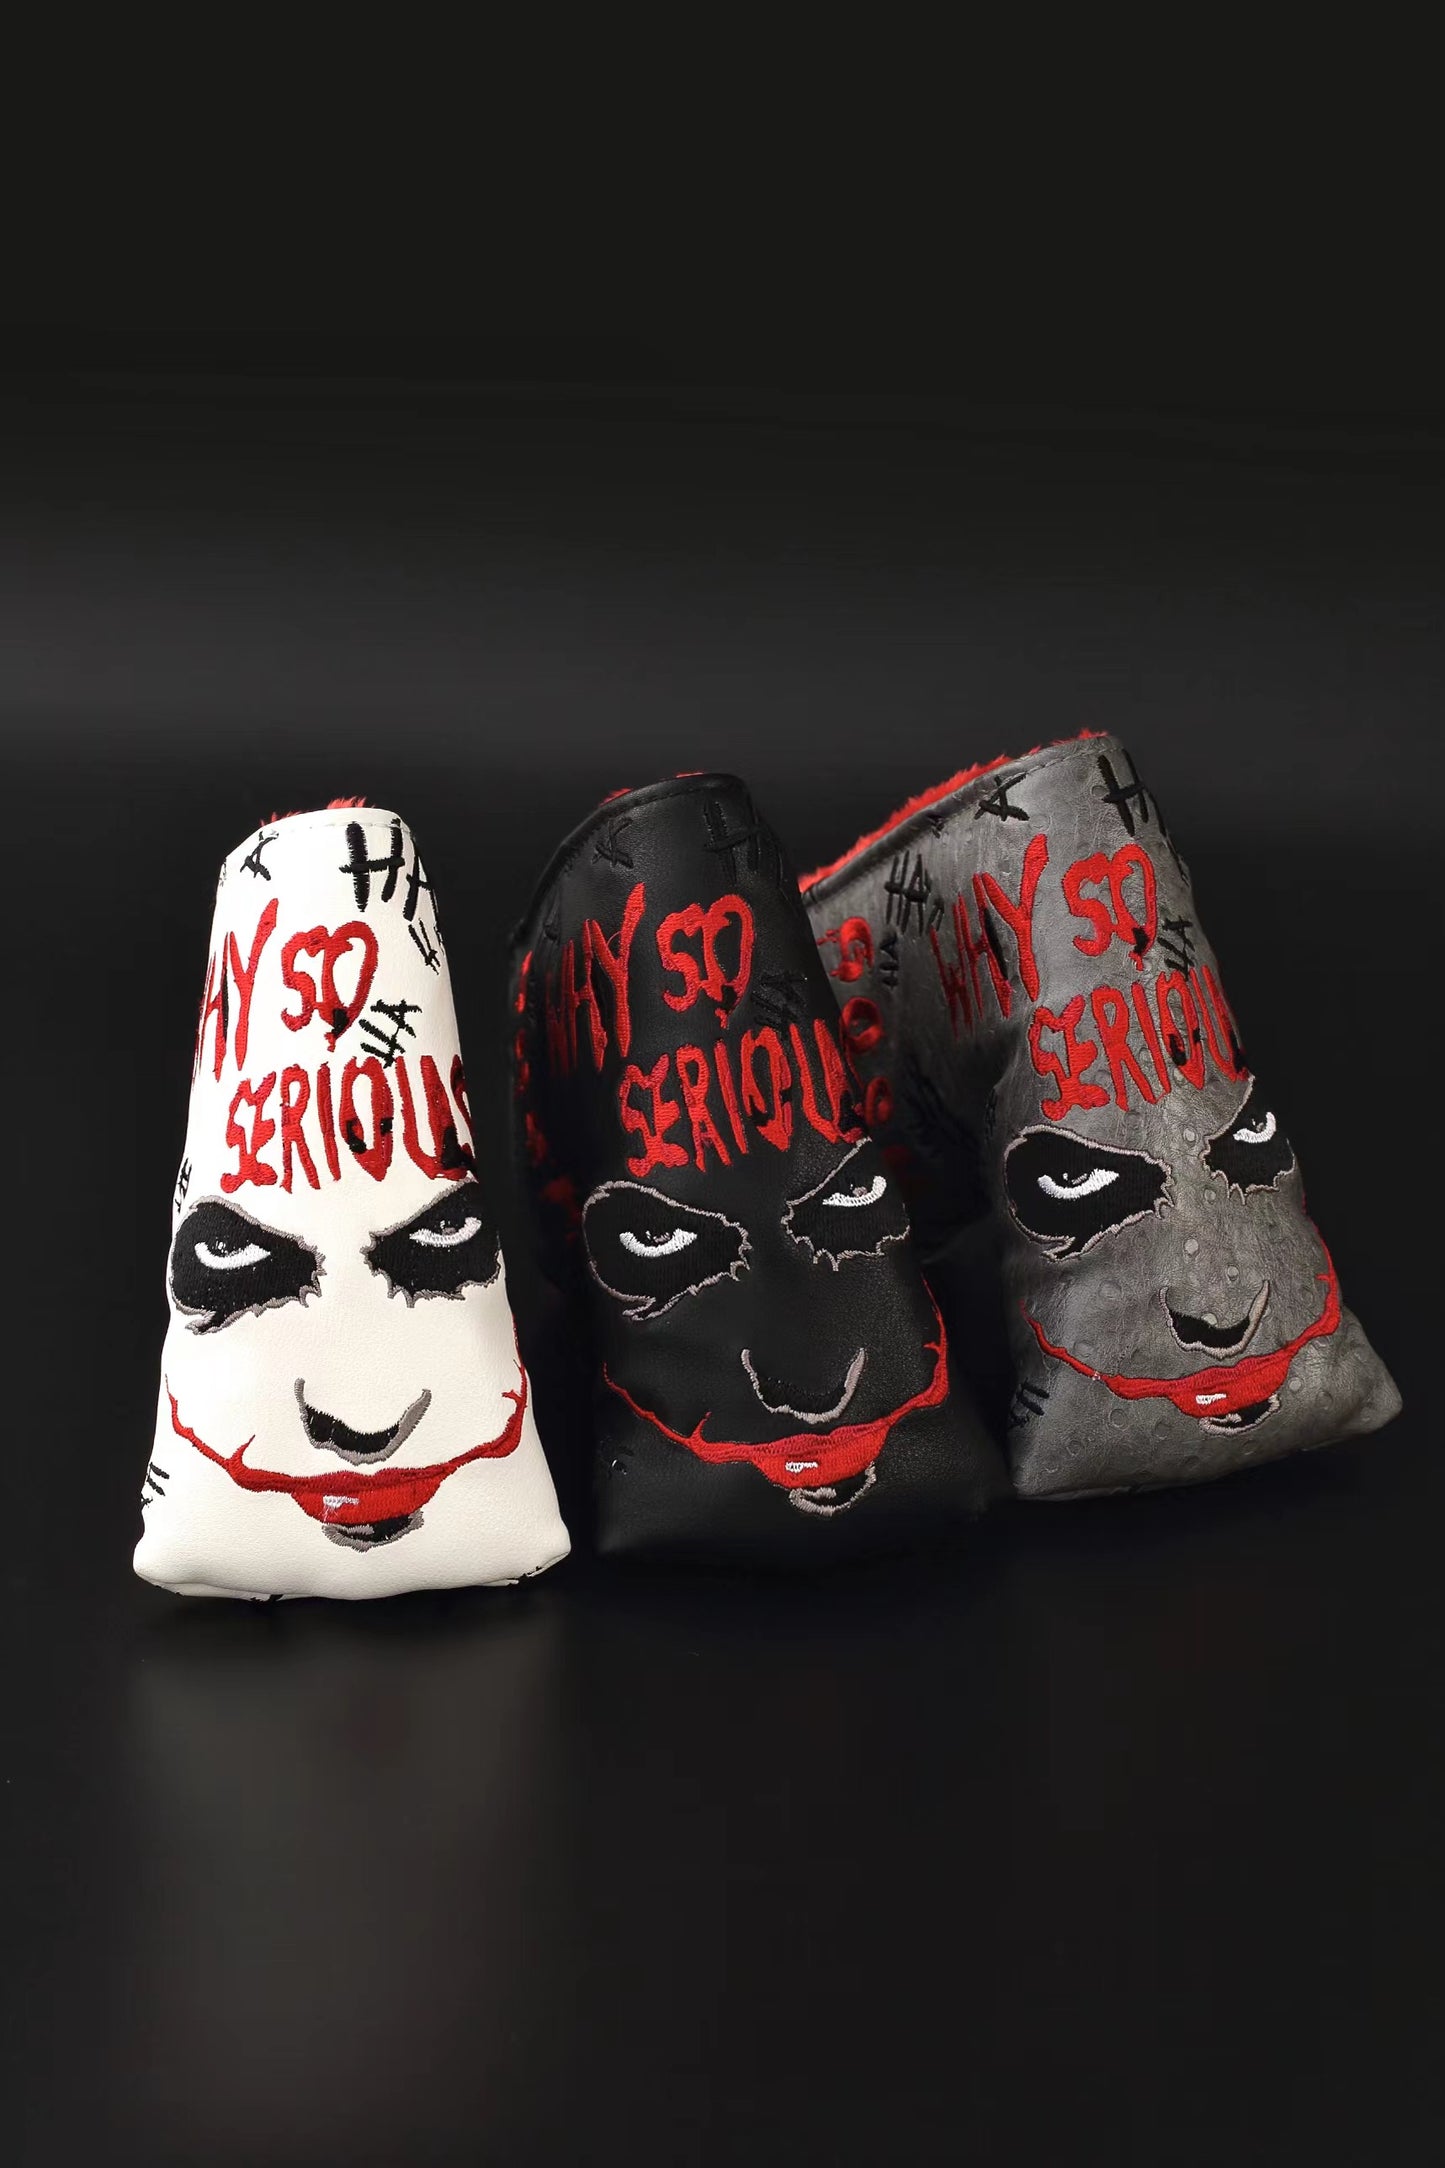 Upgraded Classic Joker Design Blade Putter Headcover by GOSH